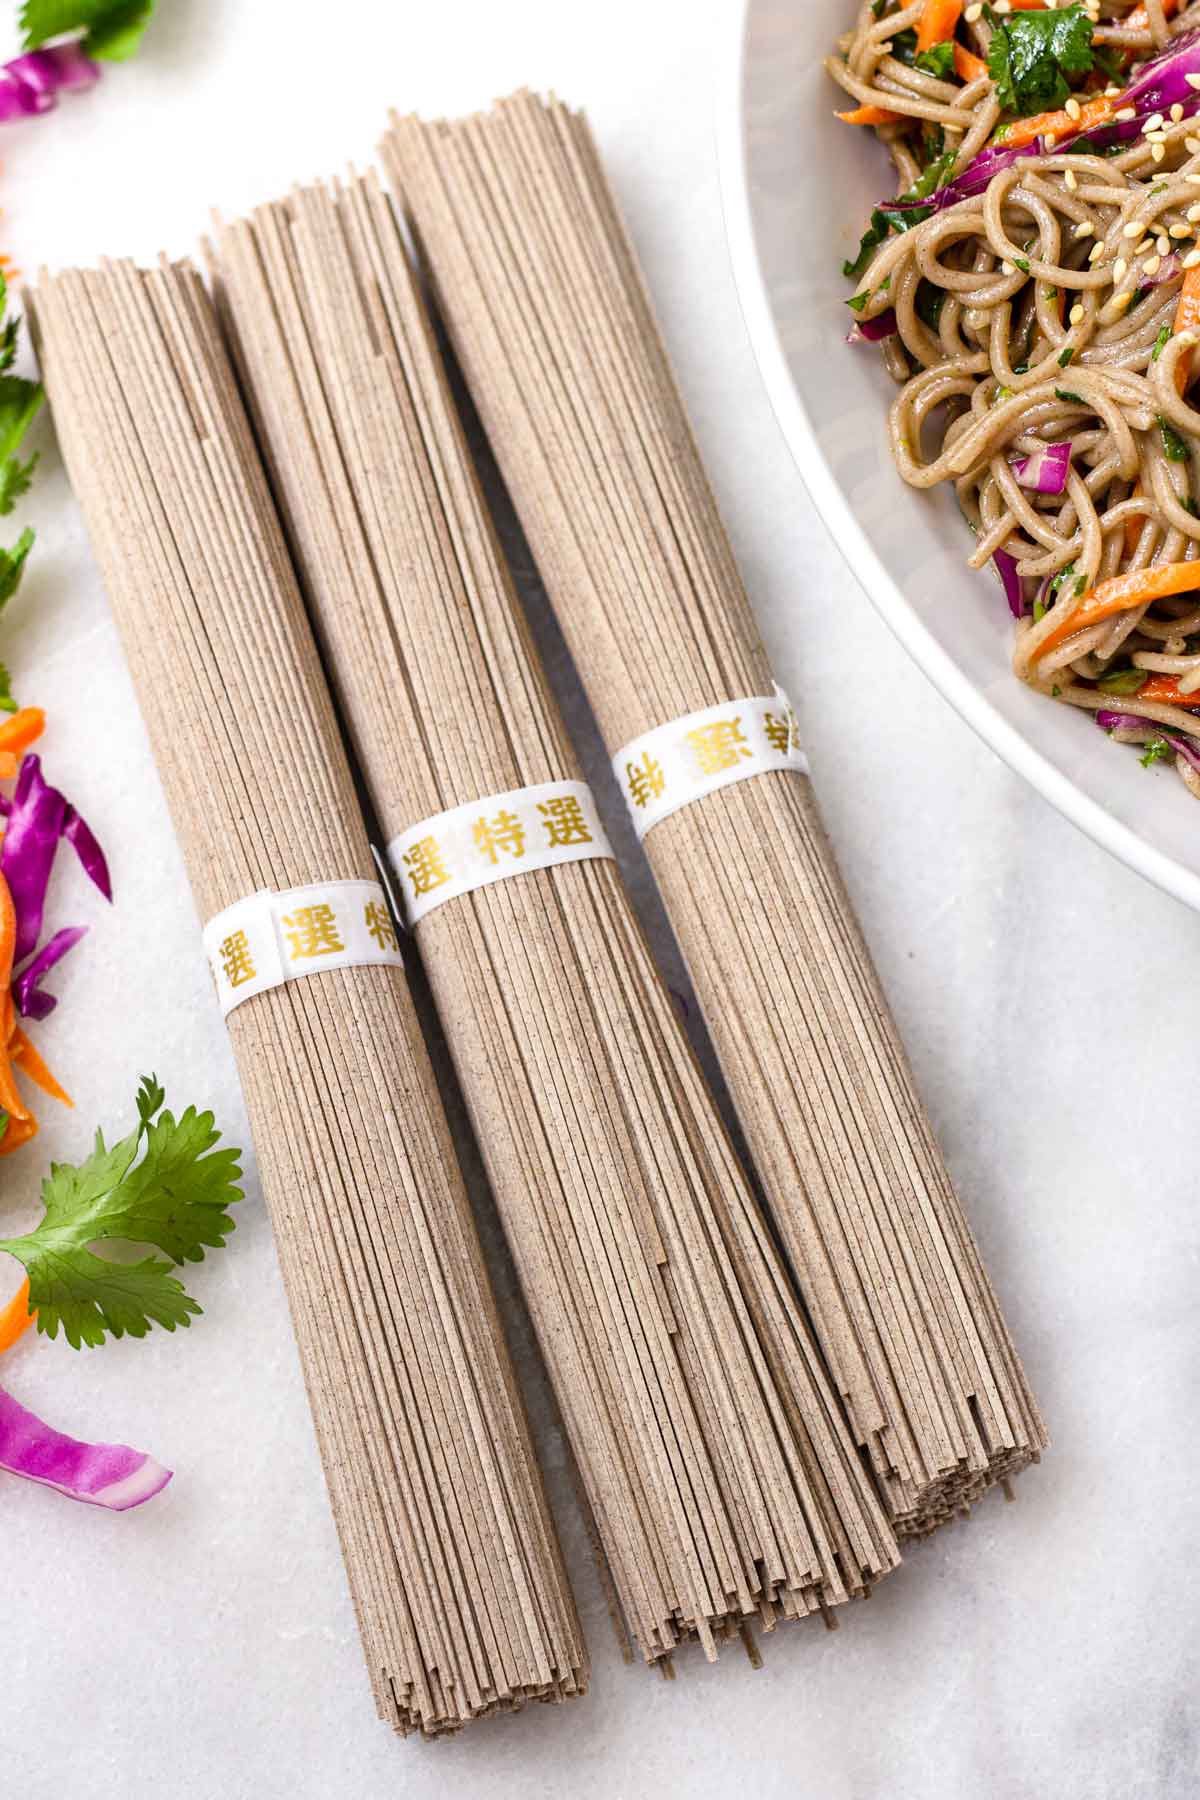 three bundles of uncooked dried soba buckwheat noodles